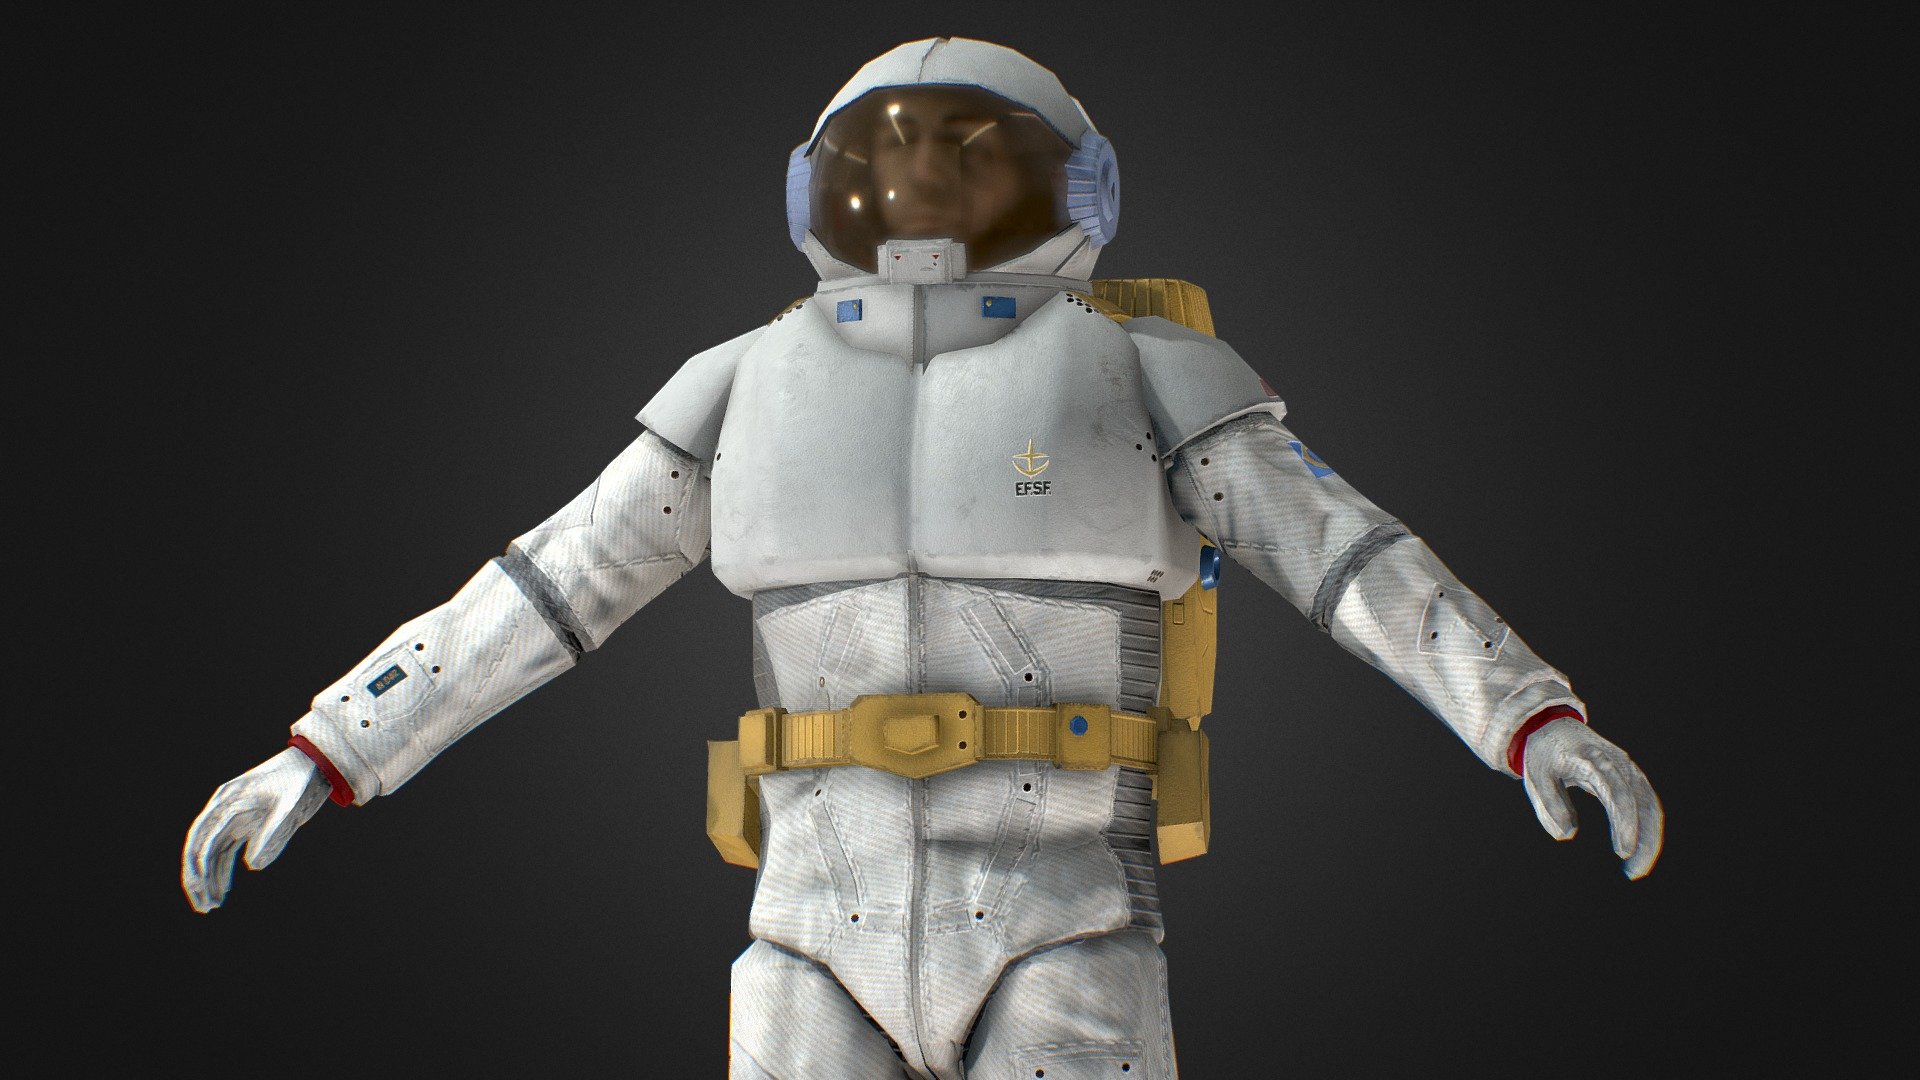 This model was made for One Year War mod of Hearts of Iron IV.
Our Mod Steam Home Page
https://steamcommunity.com/sharedfiles/filedetails/?id=2064985570 - Heavy Normal suit Spacesuit From Gundam UC 0079 - 3D model by One Year War Mod (@hoi4oneyearwar) 3d model